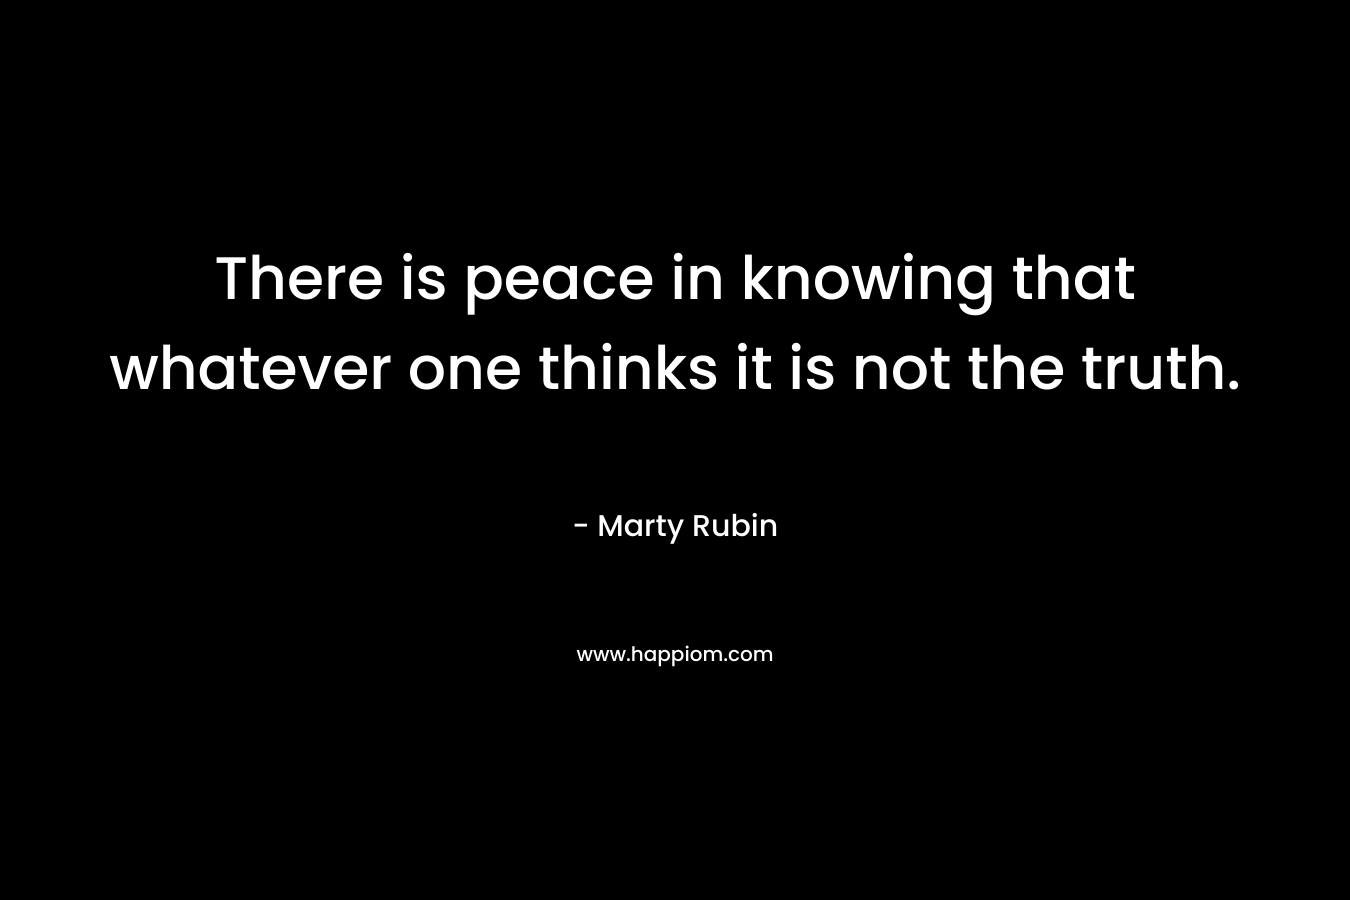 There is peace in knowing that whatever one thinks it is not the truth.